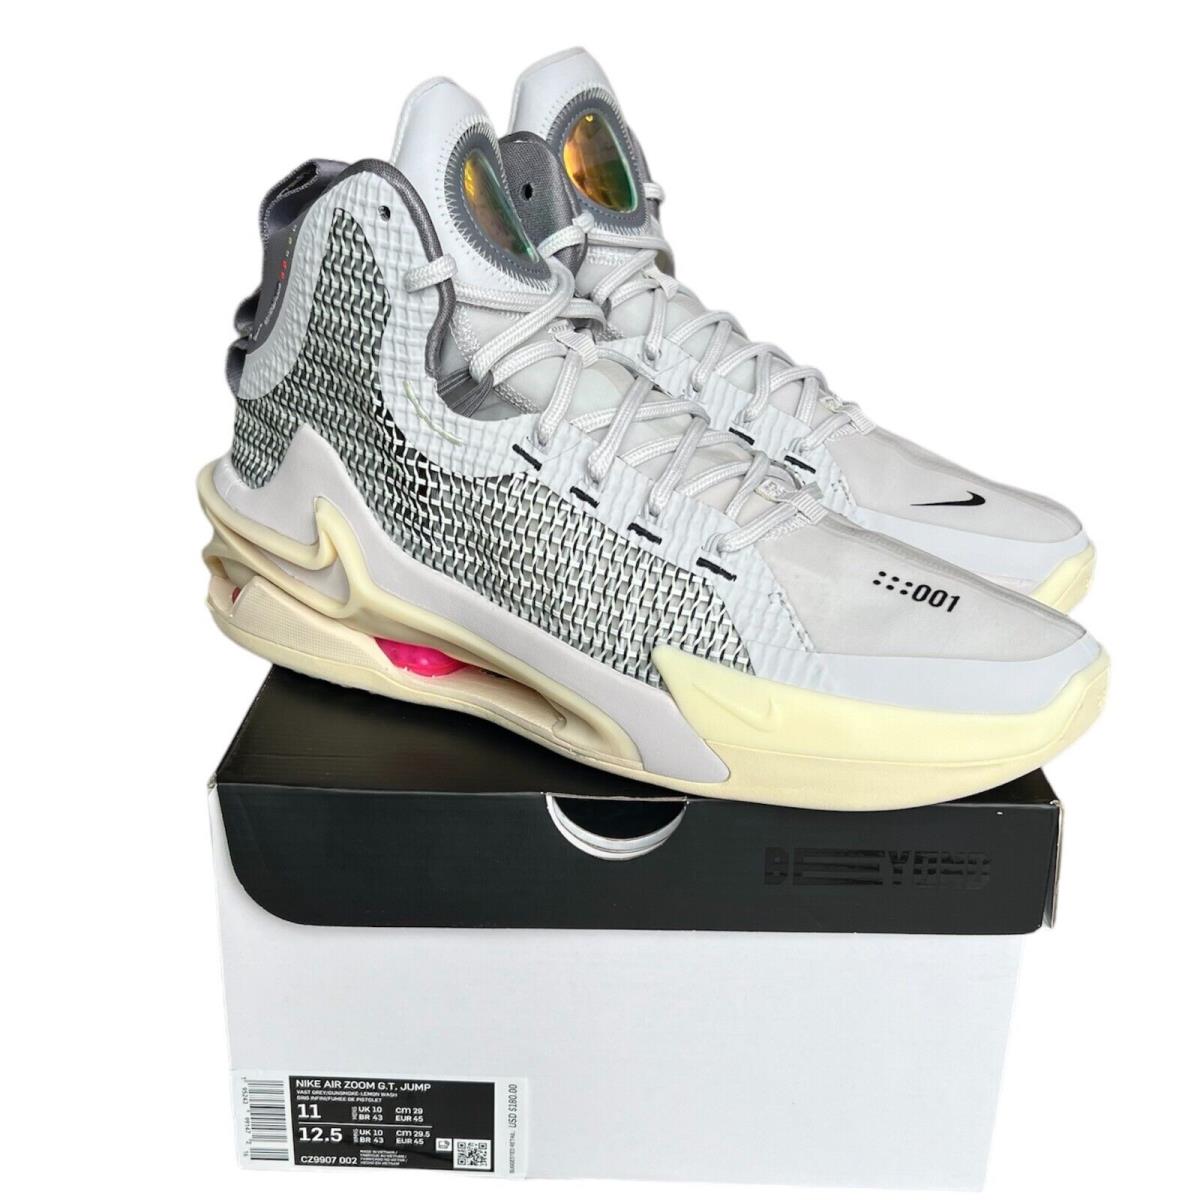 Nike Air Zoom G.t. Jump Sizes 8-15 Men`s Basketball Shoes Vast Grey CZ9907-002